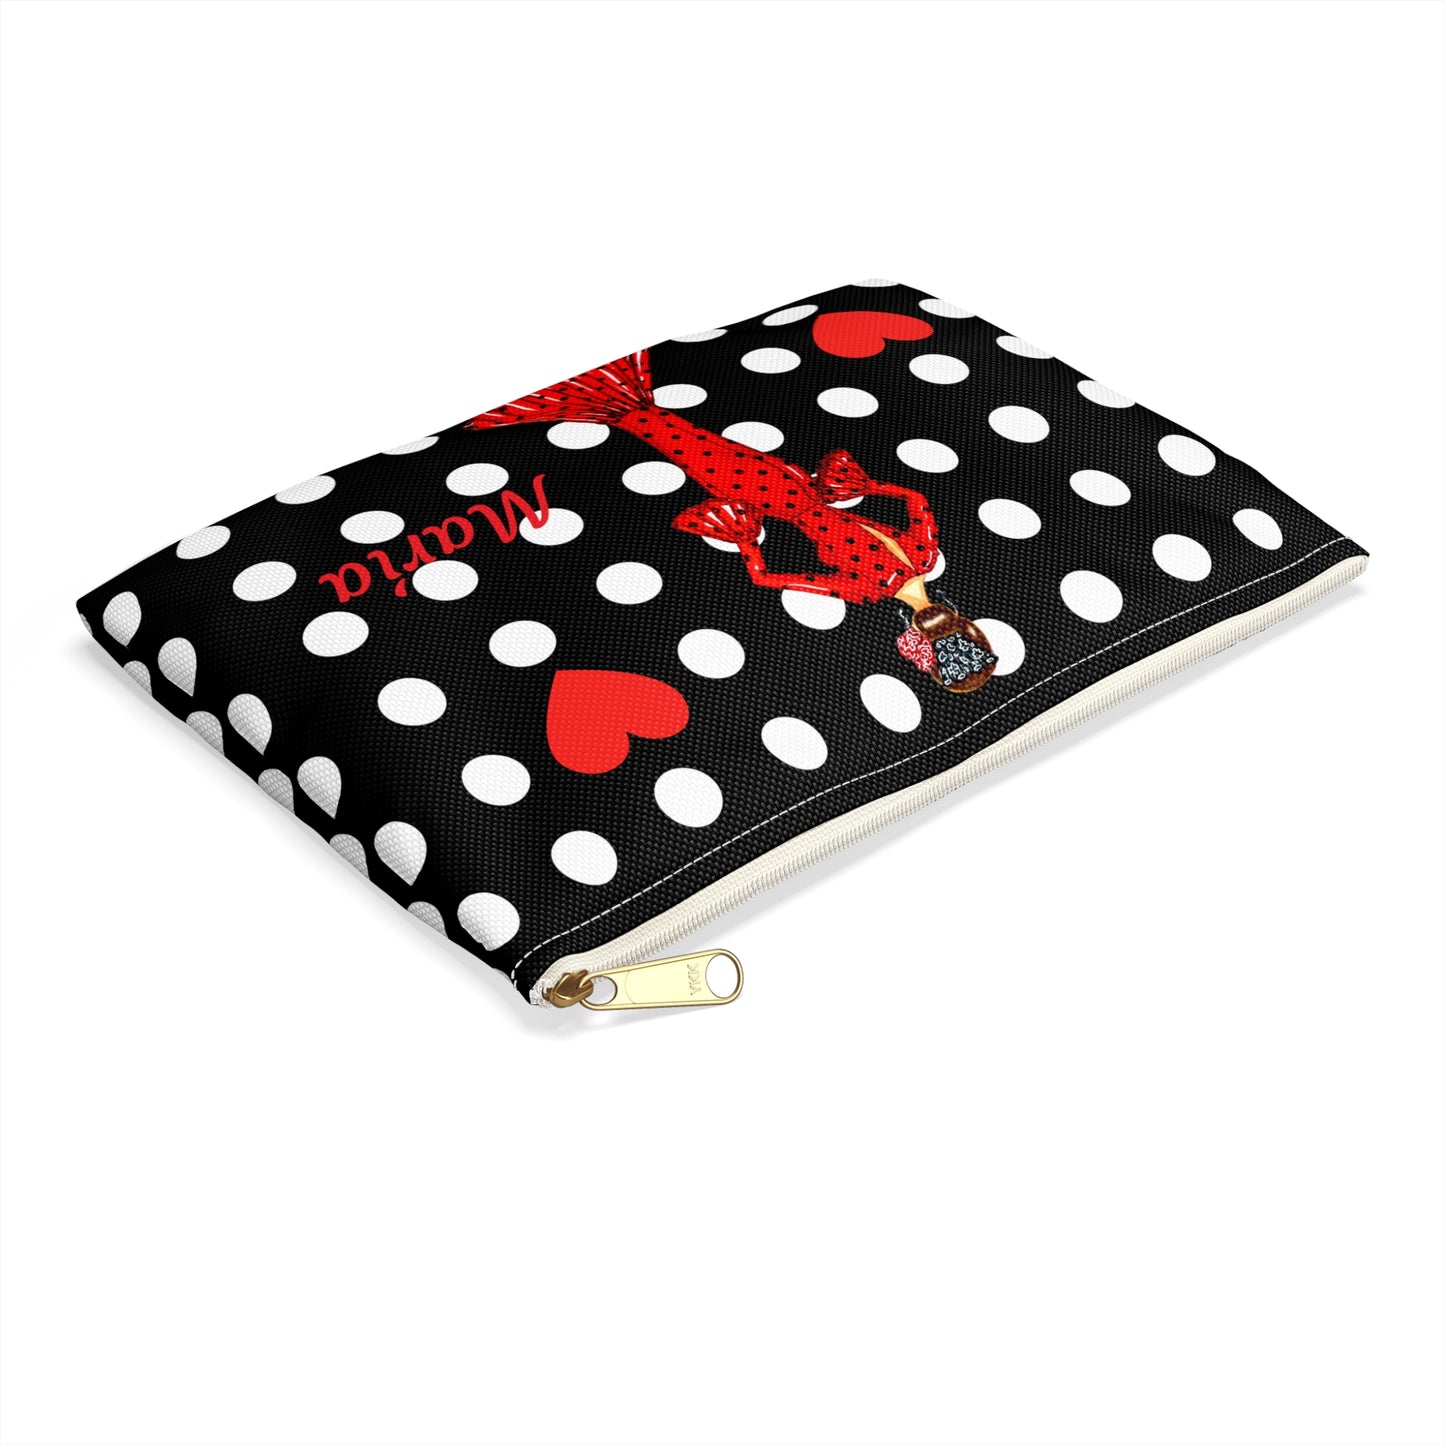 a black and white polka dot bag with a red dragon on it